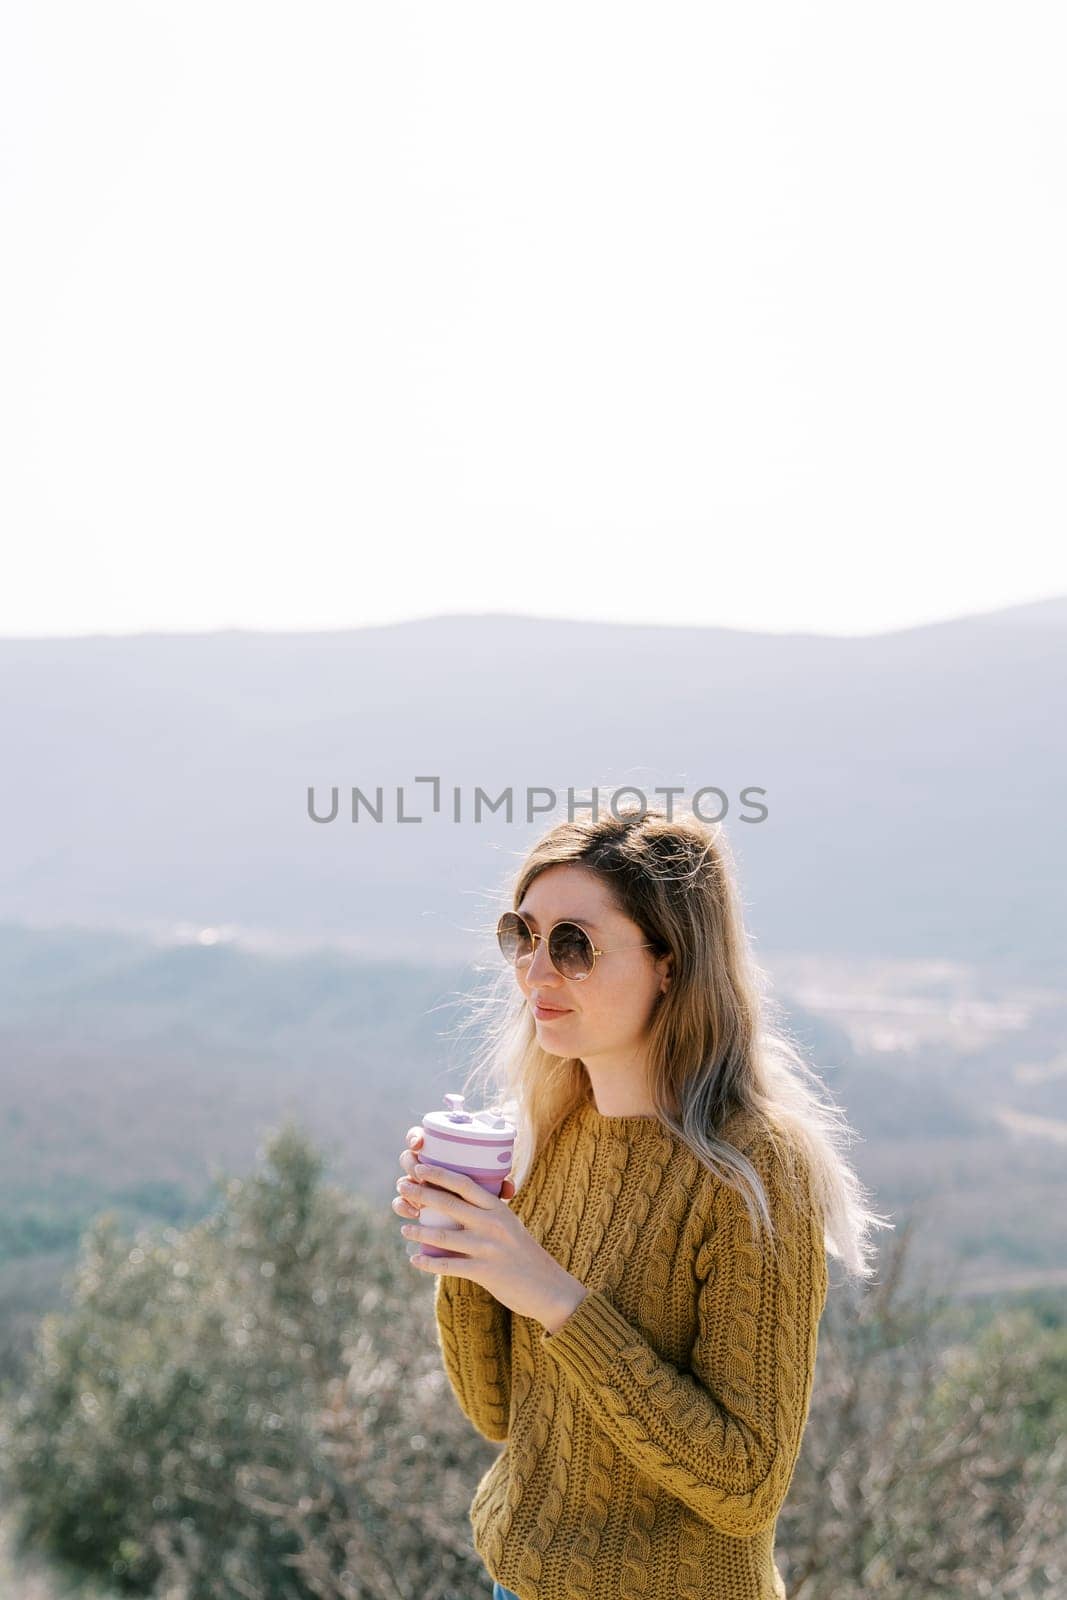 Smiling female traveler with a glass of coffee stands on a mountain. High quality photo